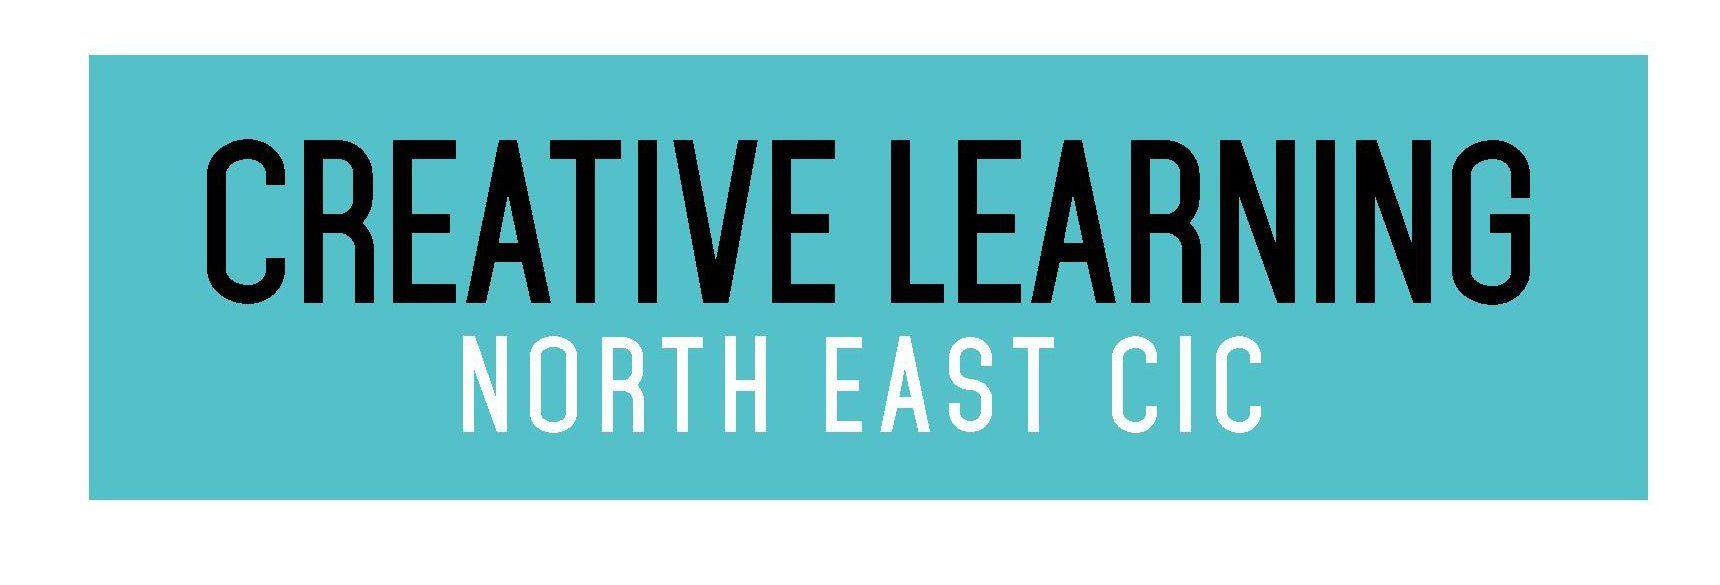 Creative Learning North East